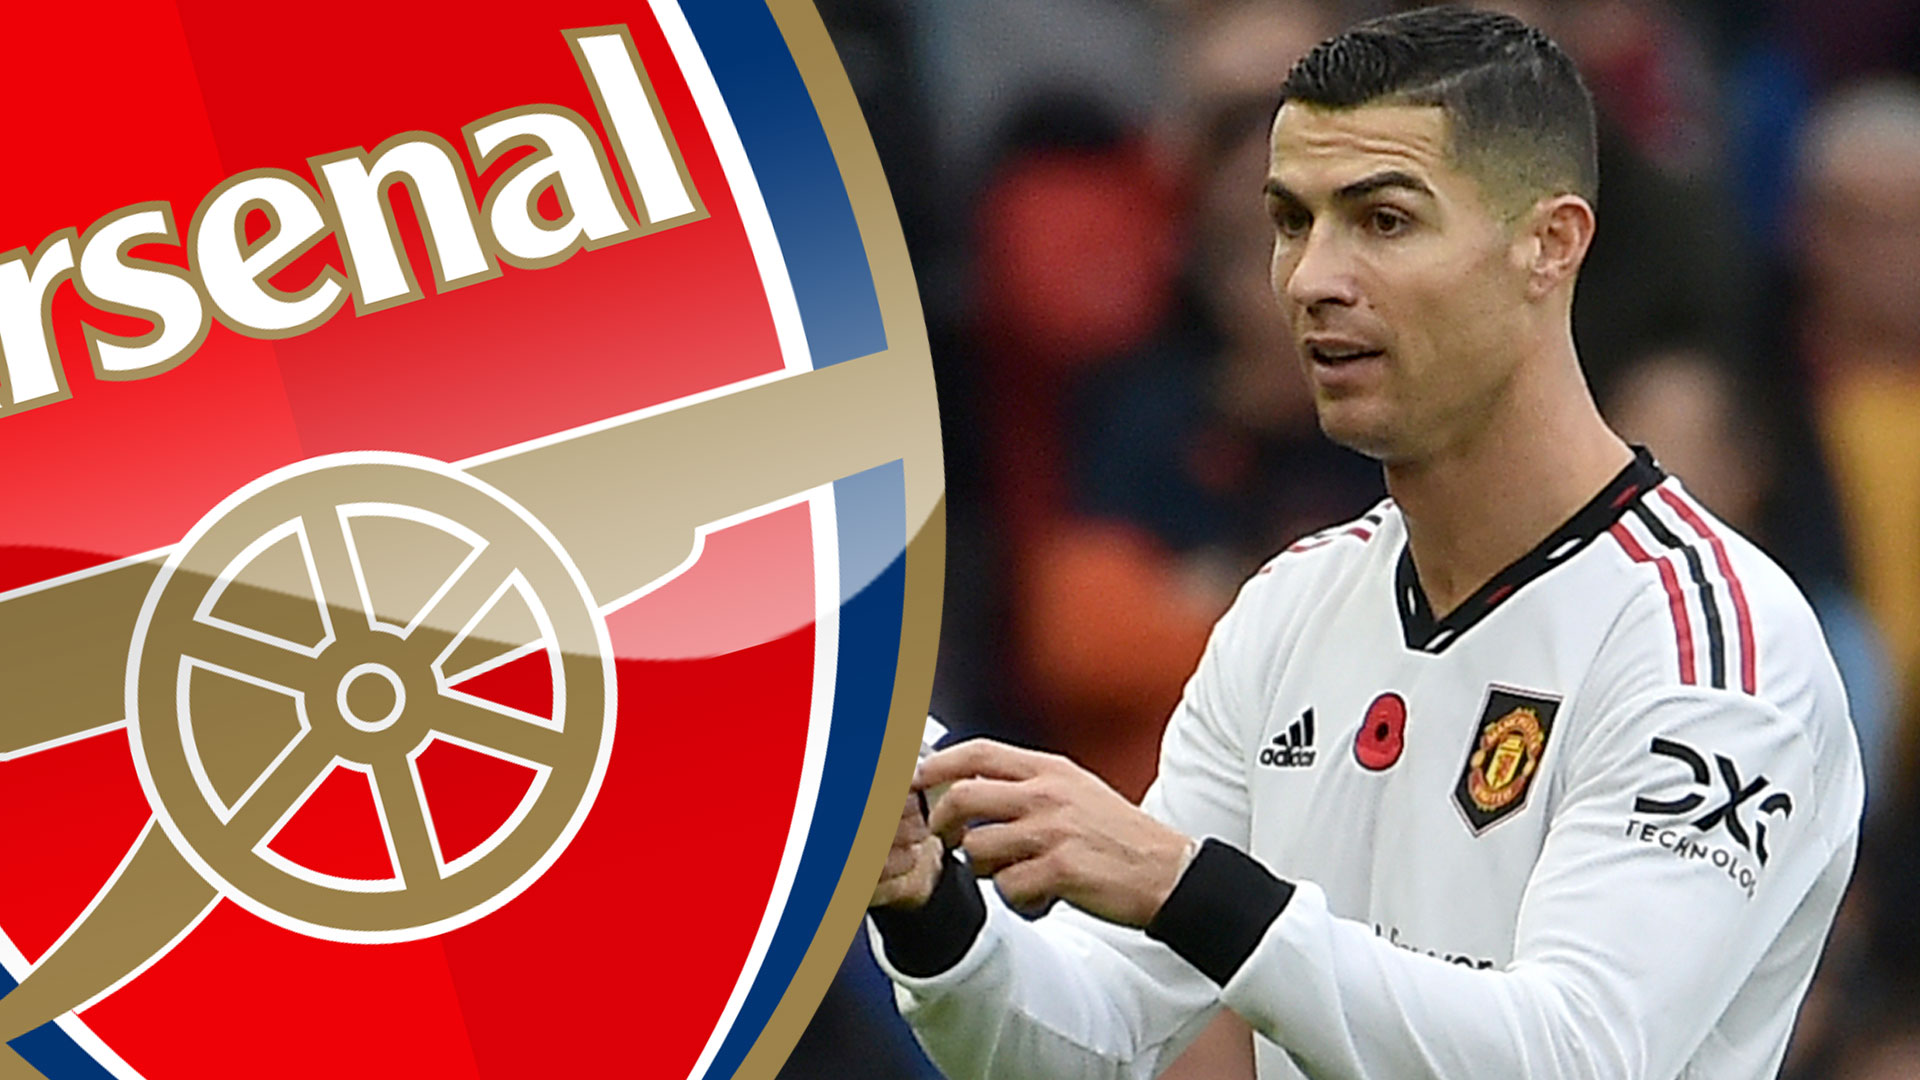 ‘A complete disaster!’ – Nigel Winterburn urges Arsenal to avoid move for free agent Cristiano Ronaldo - Bóng Đá